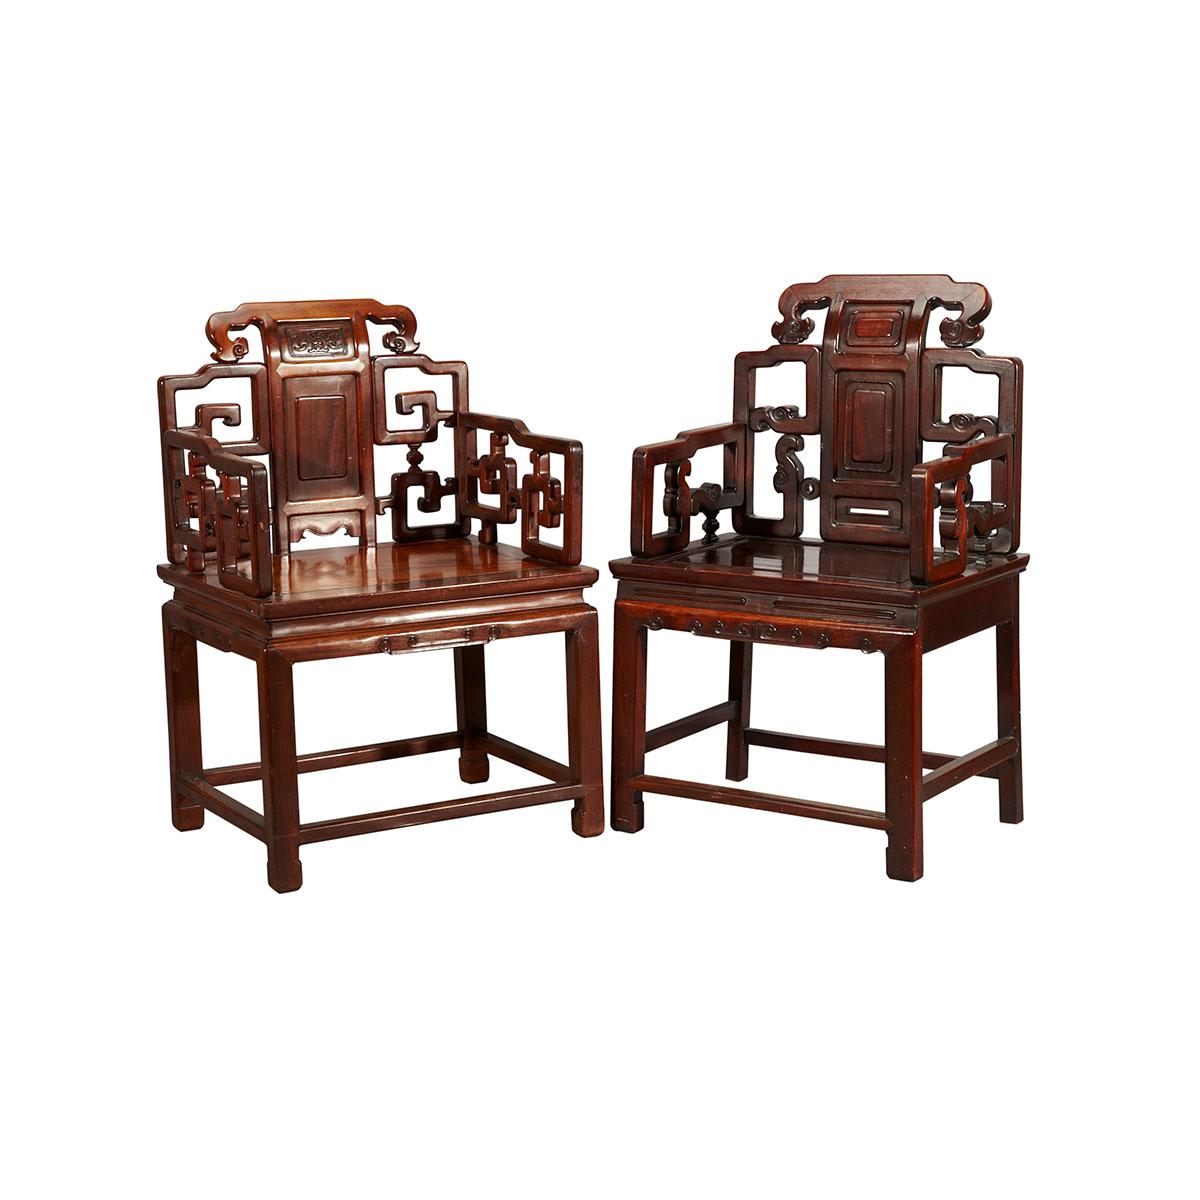 Pair of Hongmu Arm Chairs, Late Qing Dynasty